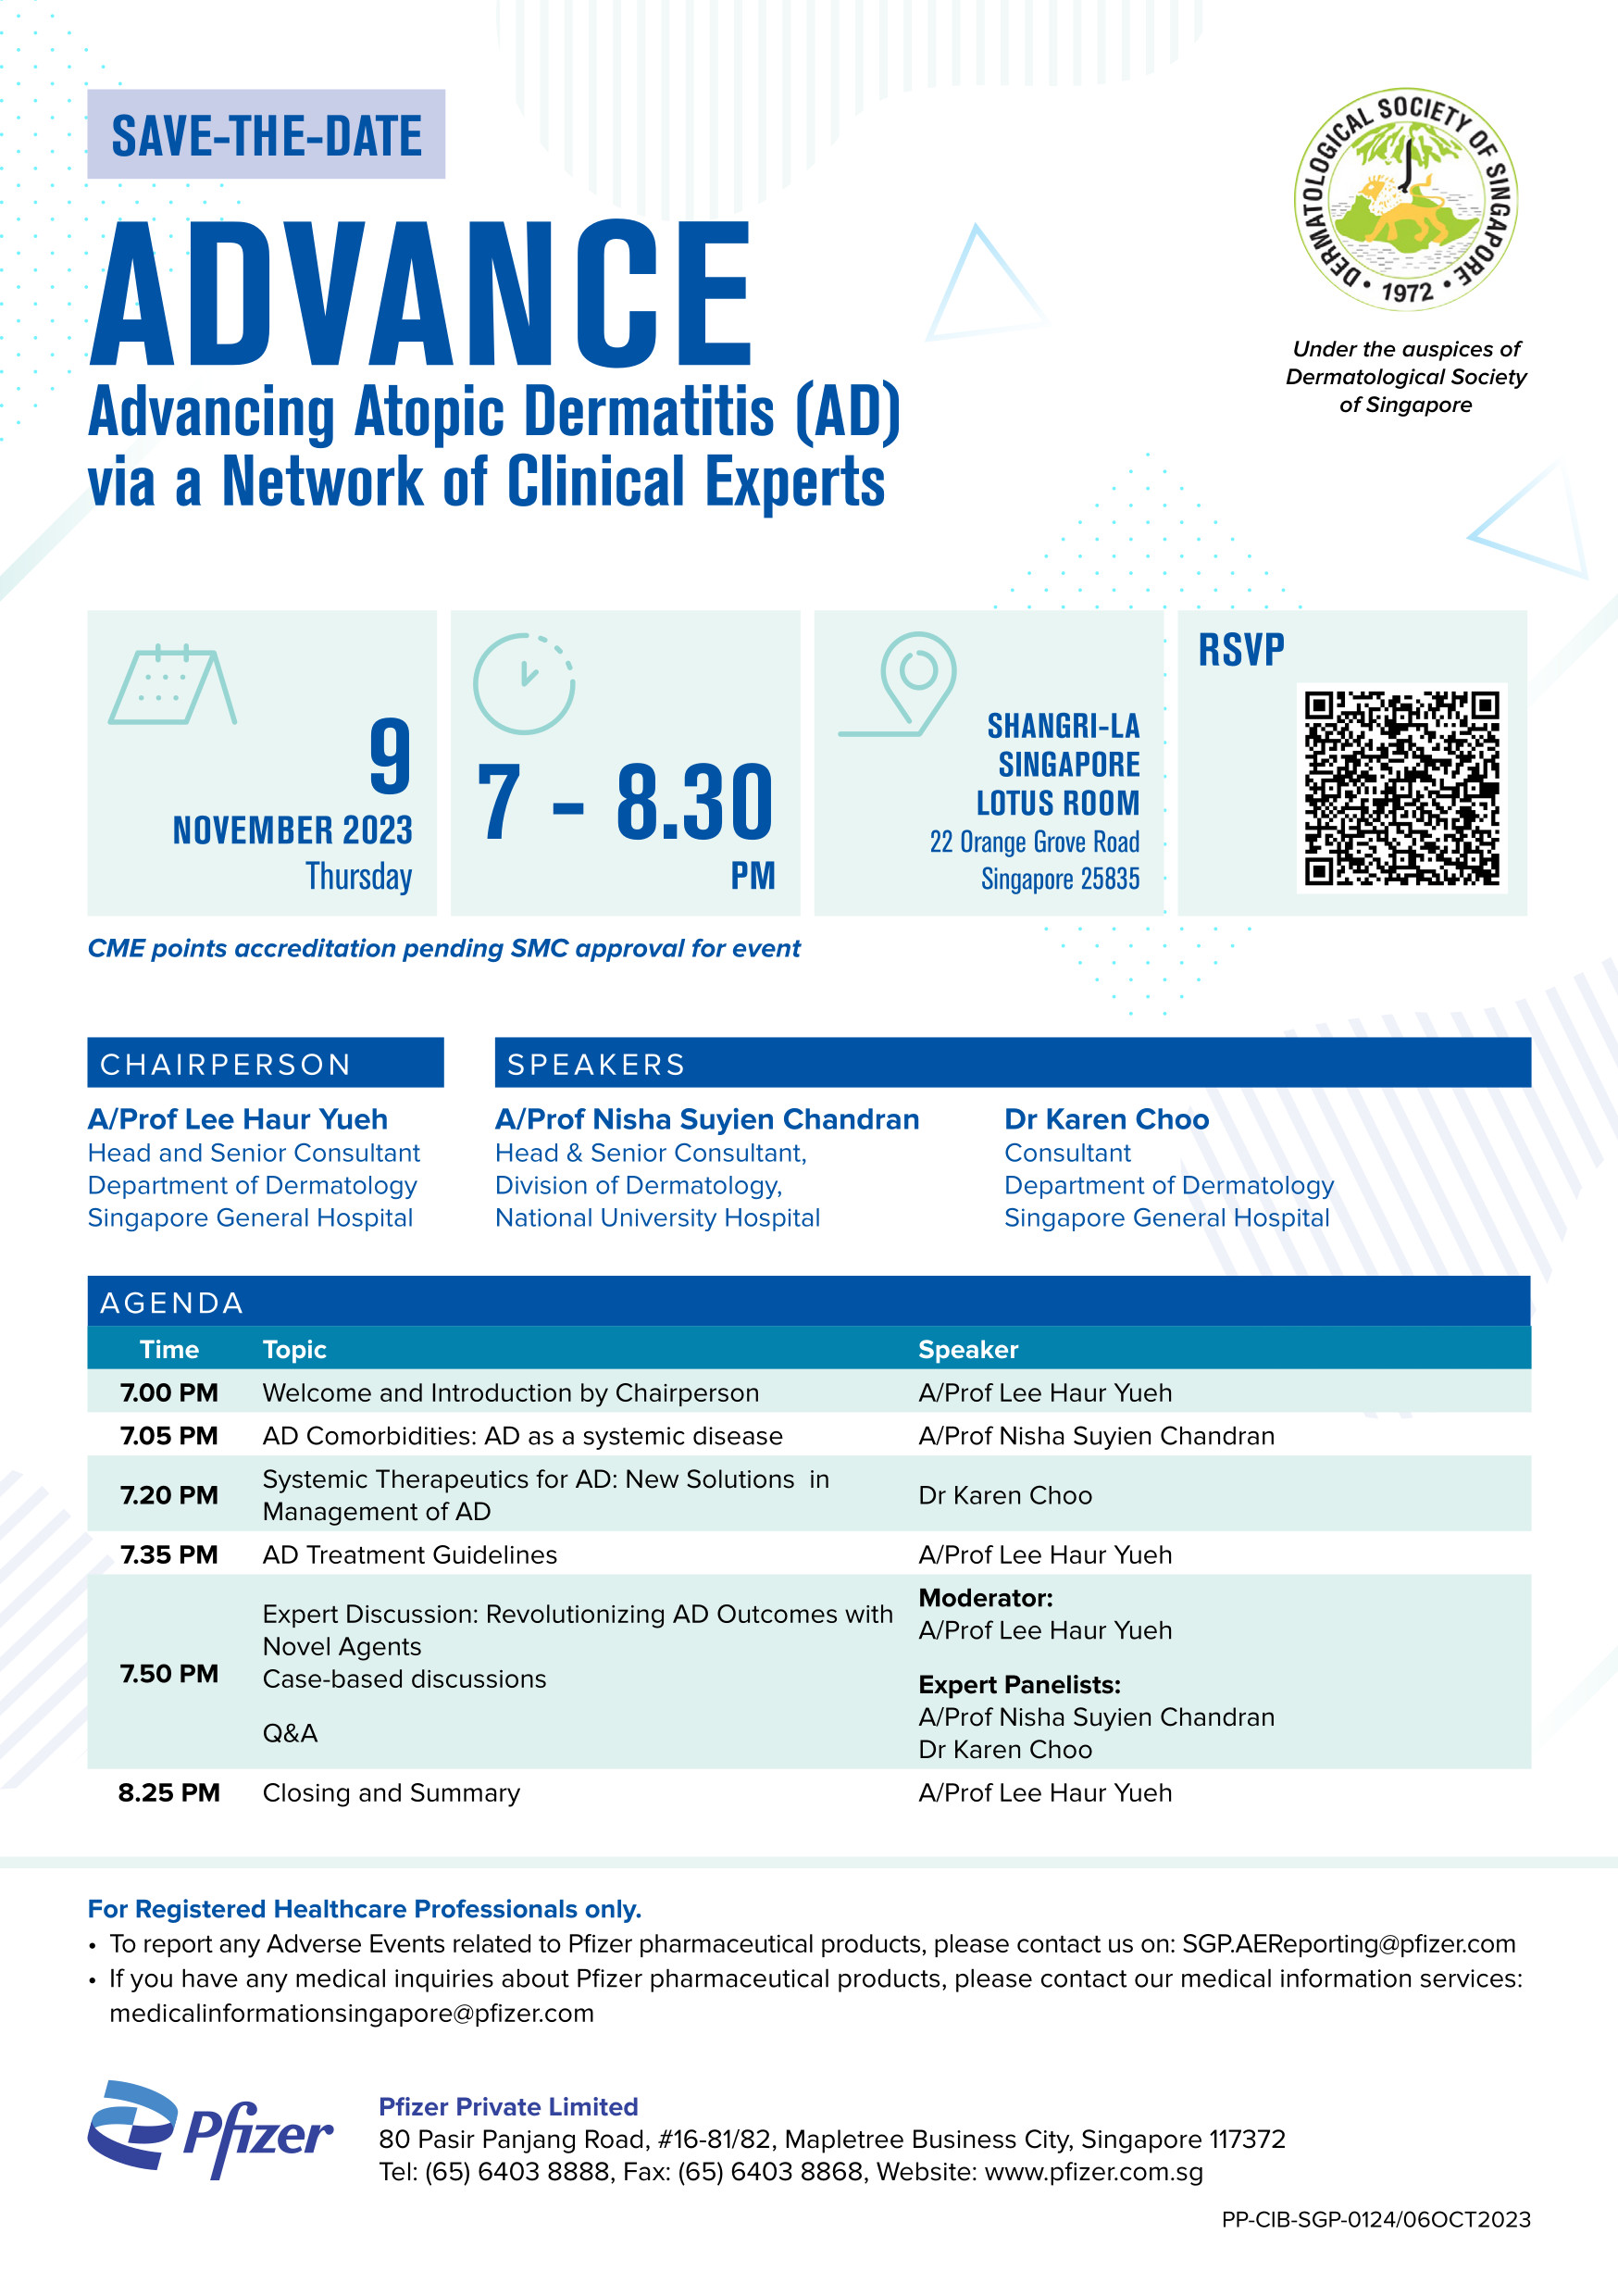 Advancing Atopic Dermatitis (AD) via a Network of Clinical Experts @ Shangri-La Singapore